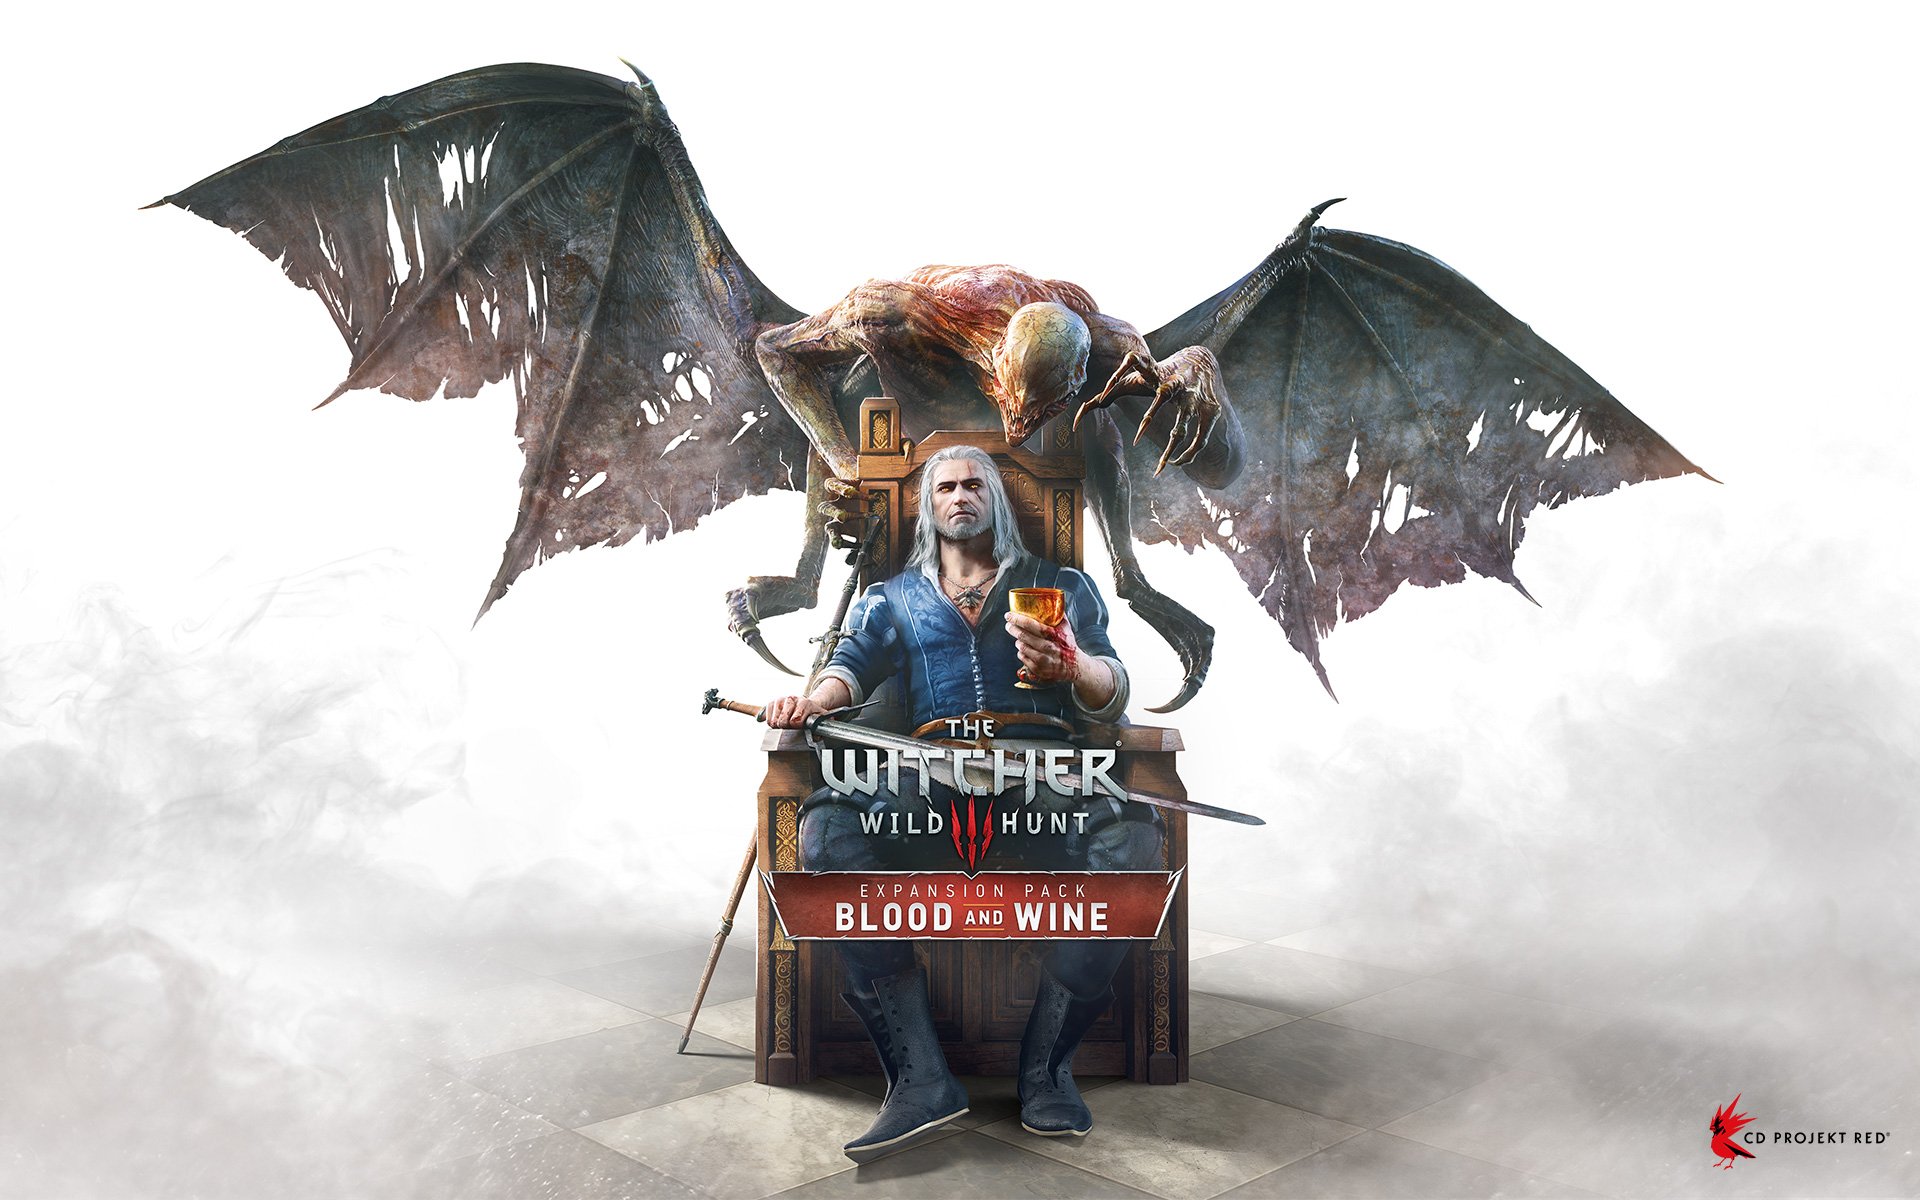  The Witcher 3: Wild Hunt - Blood and Wine 